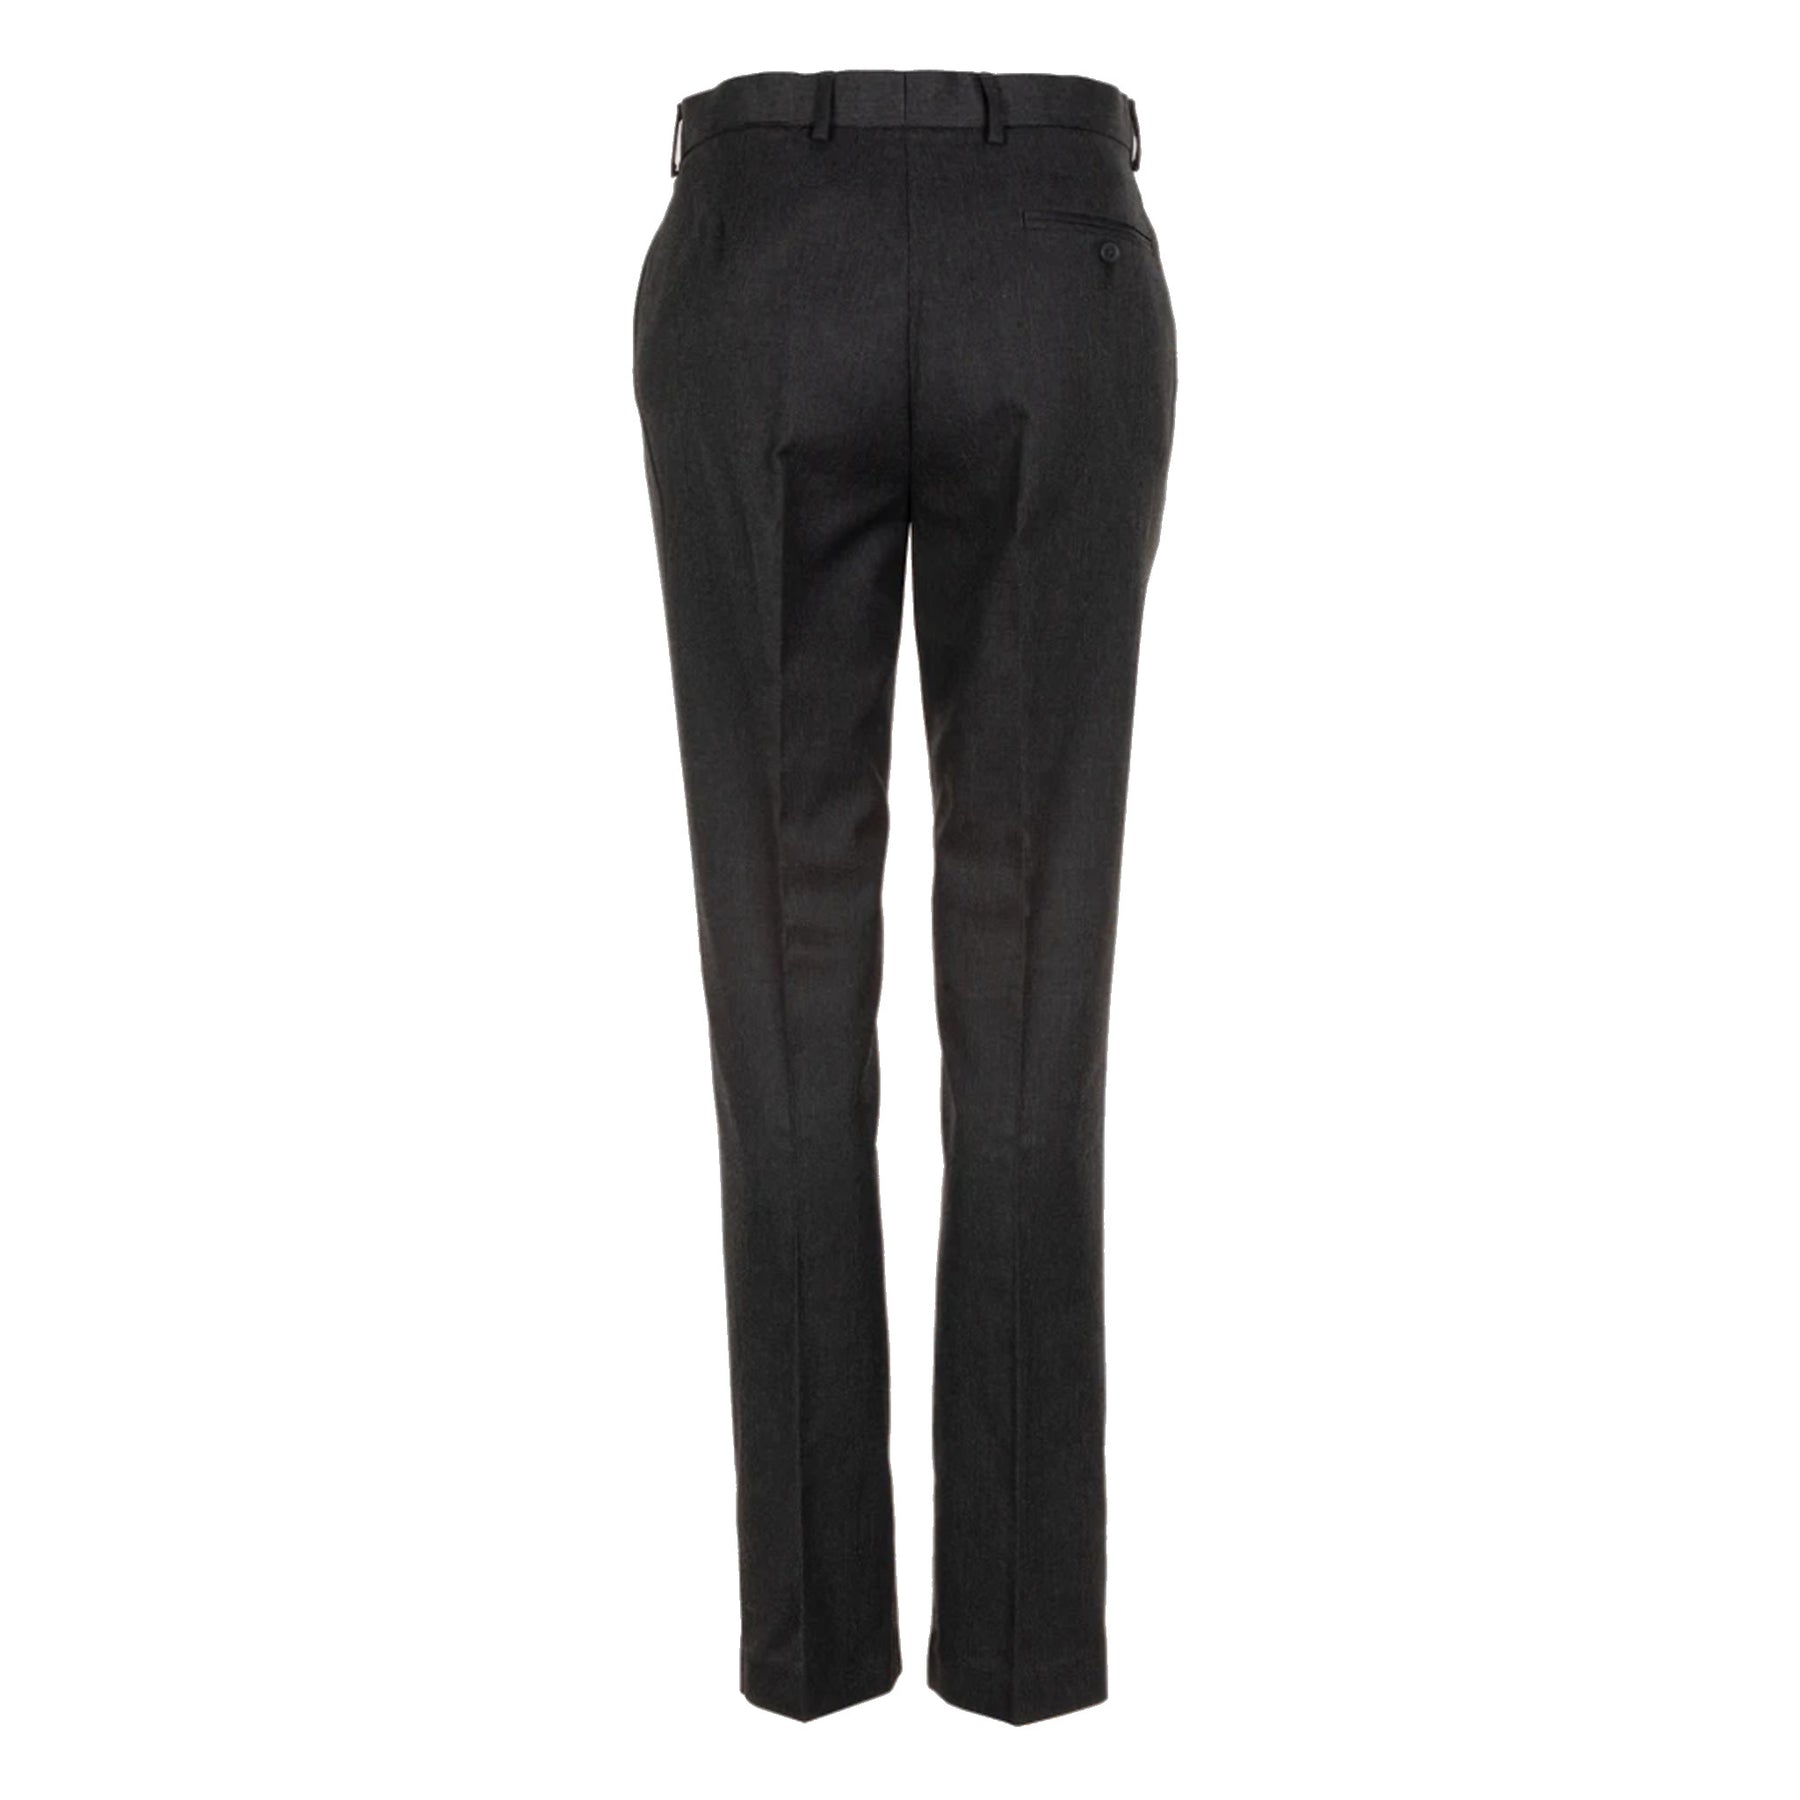 Boys Tapered Fit Trouser BT4: Charcoal